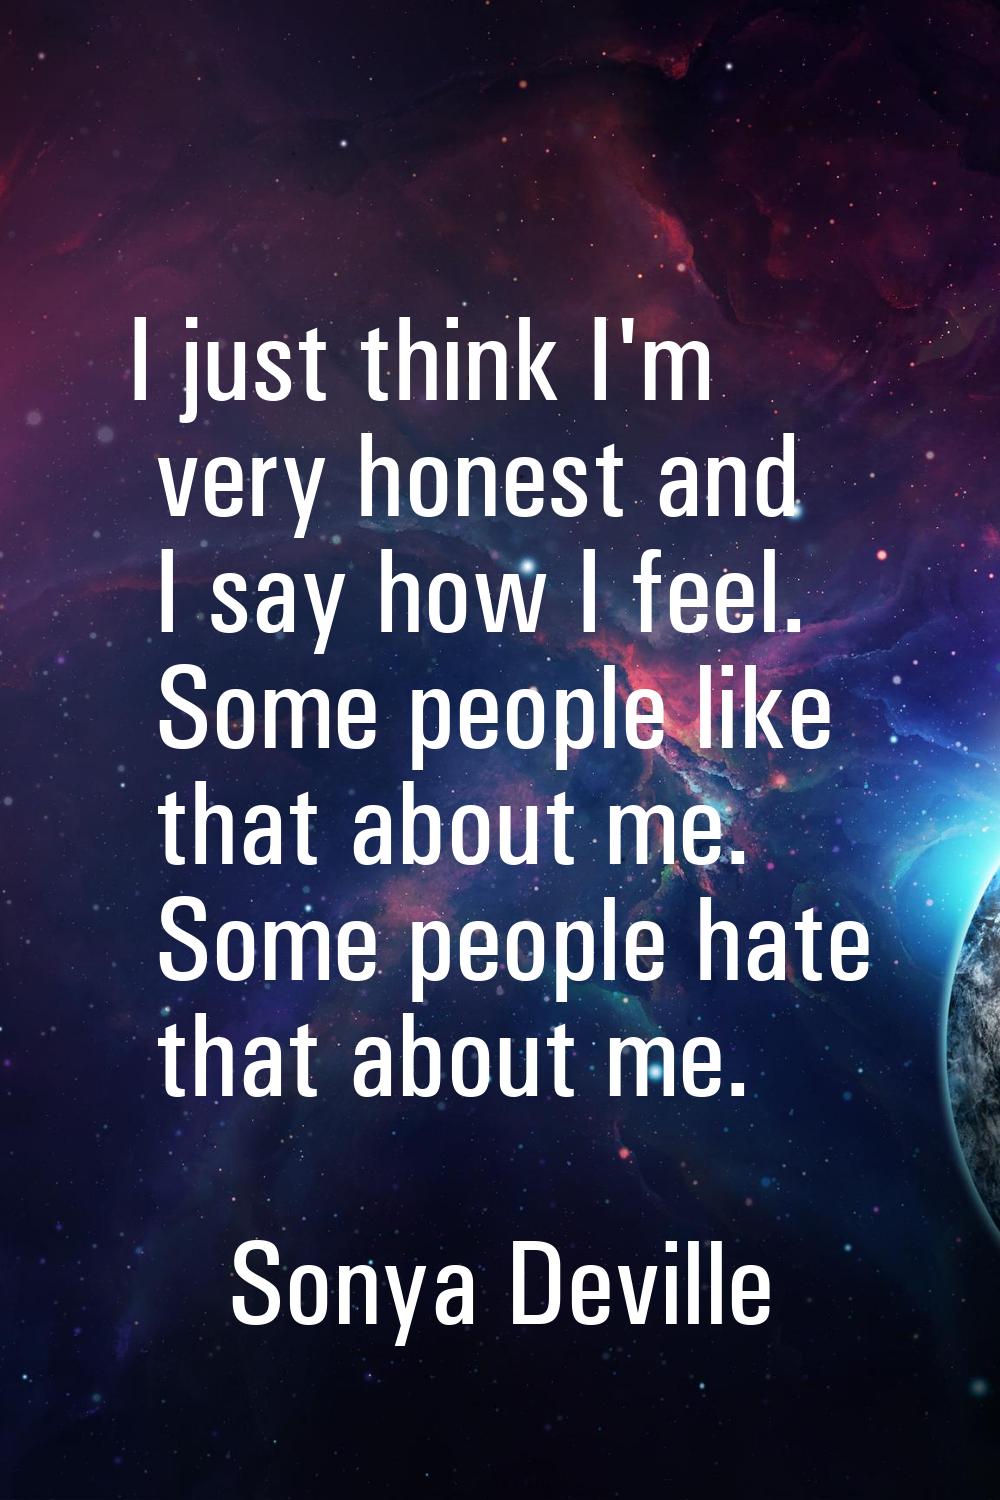 I just think I'm very honest and I say how I feel. Some people like that about me. Some people hate